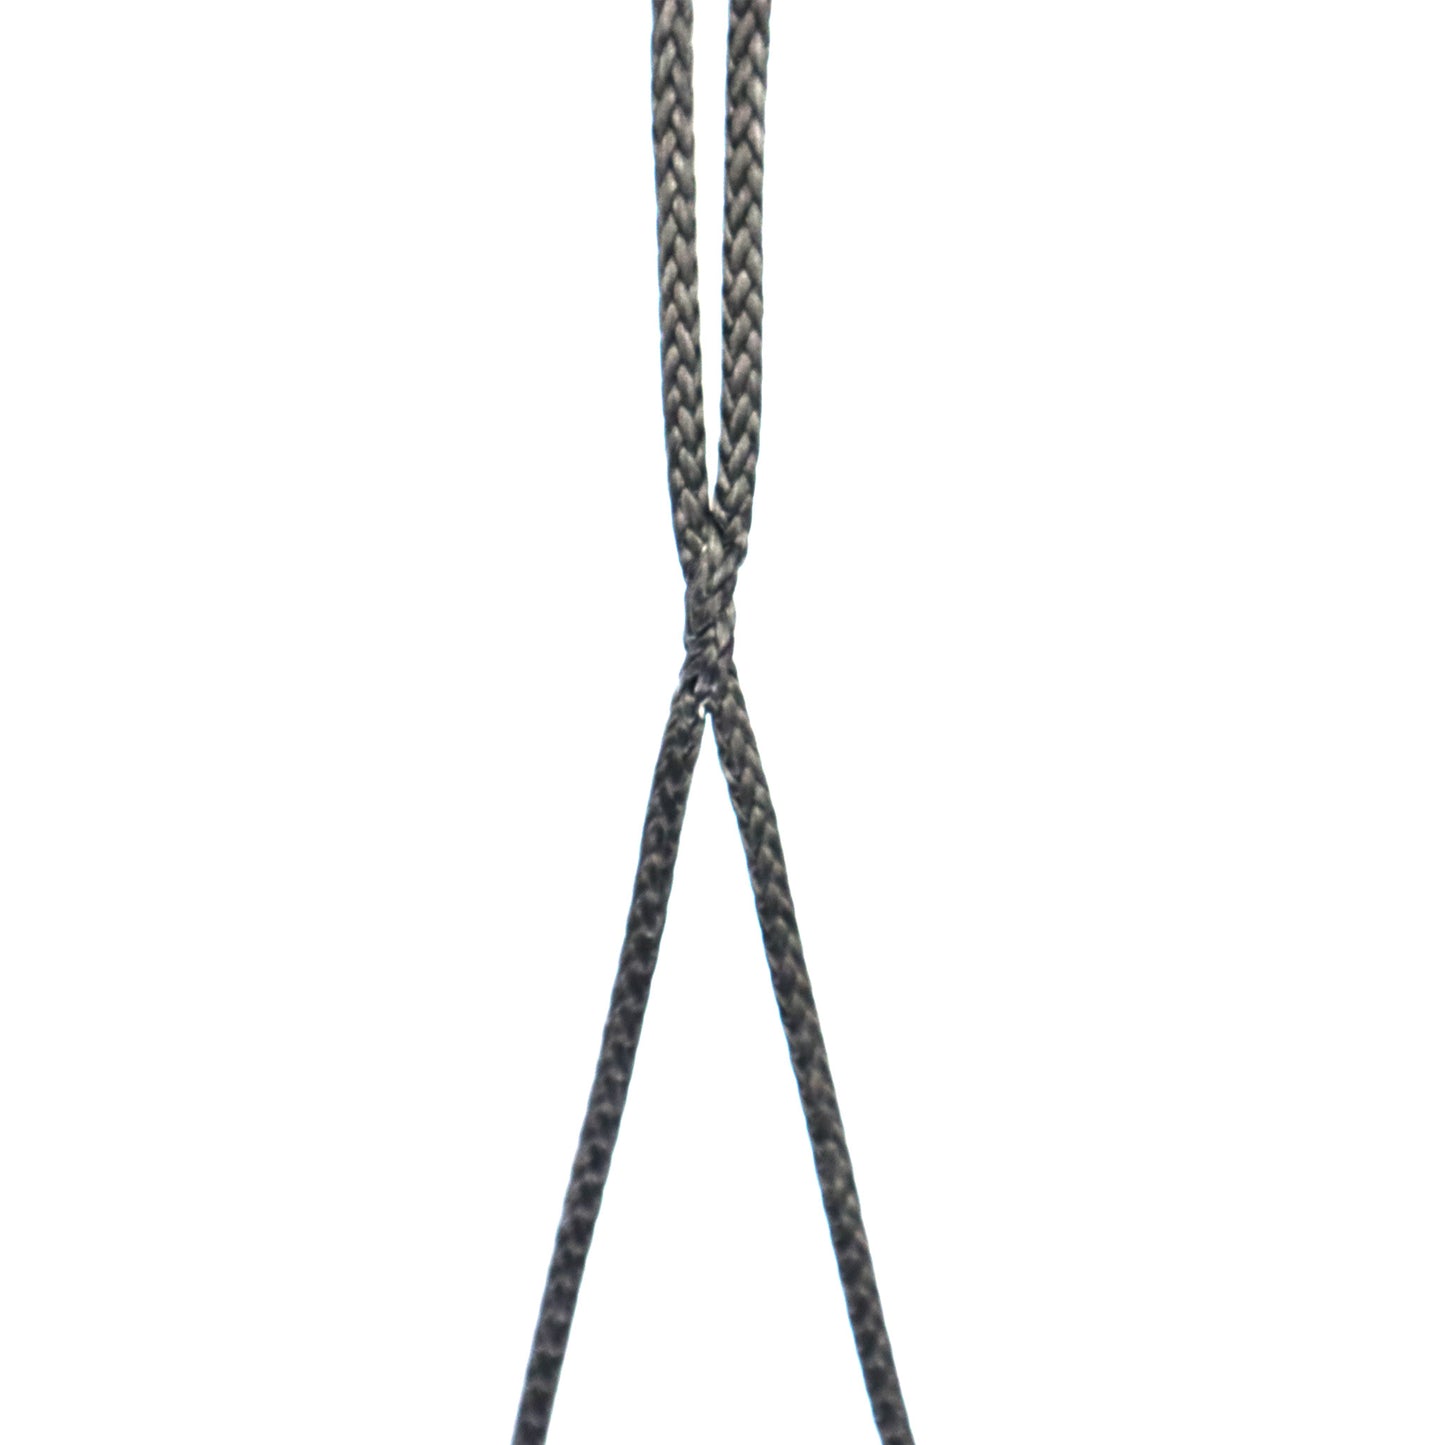 Hang Free's 1/8 F8 Single Step Movable Amsteel Aider Close Up